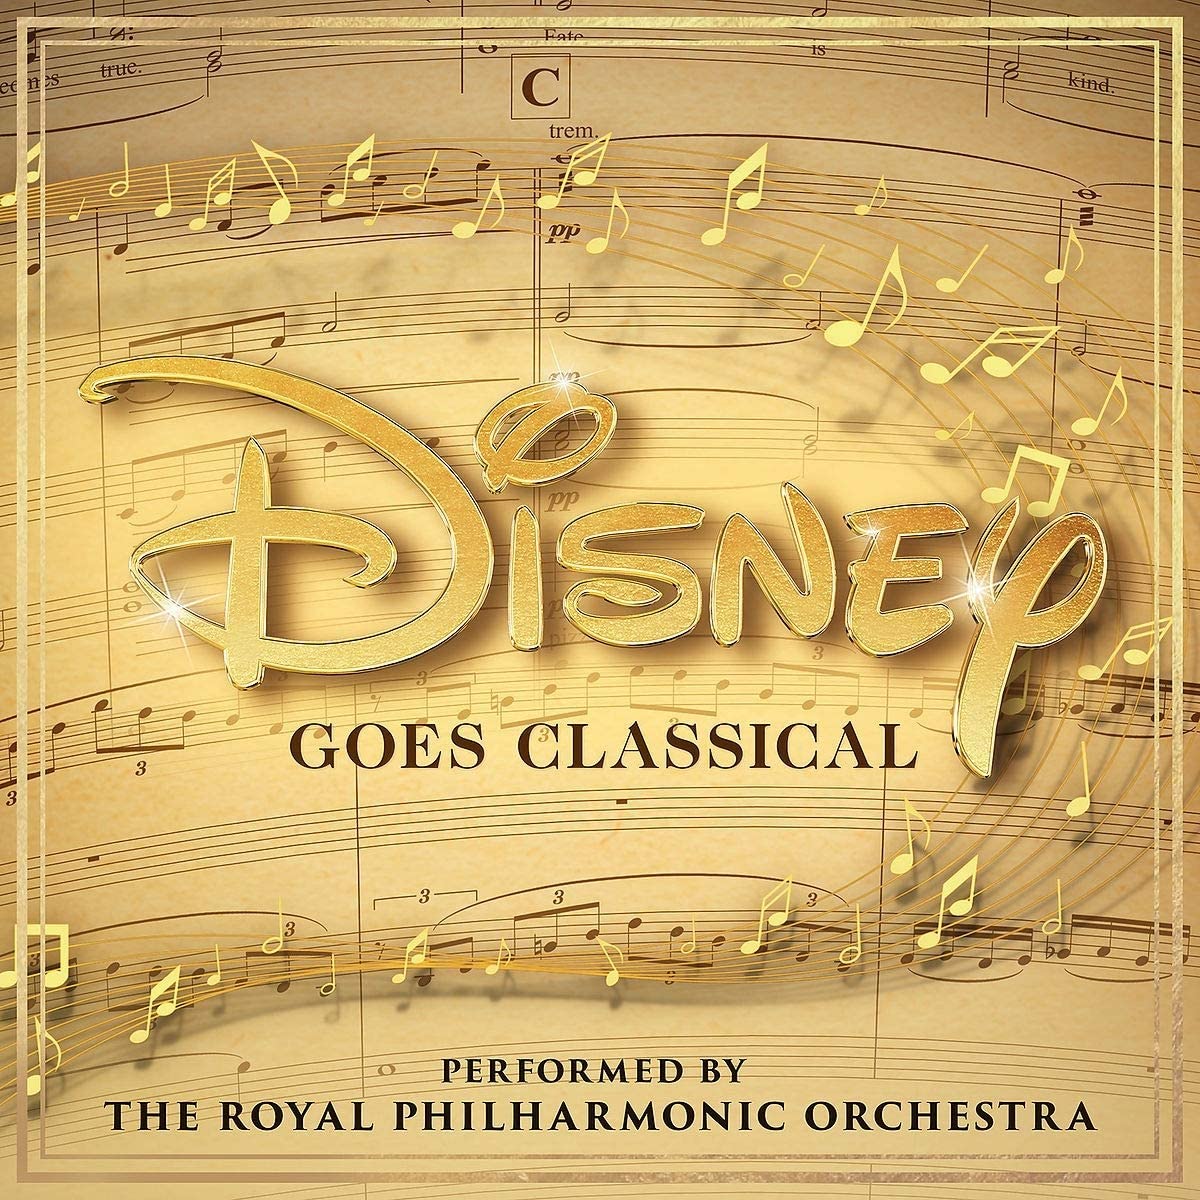 Royal Philharmonic Orchestra, The Disney Goes Classical